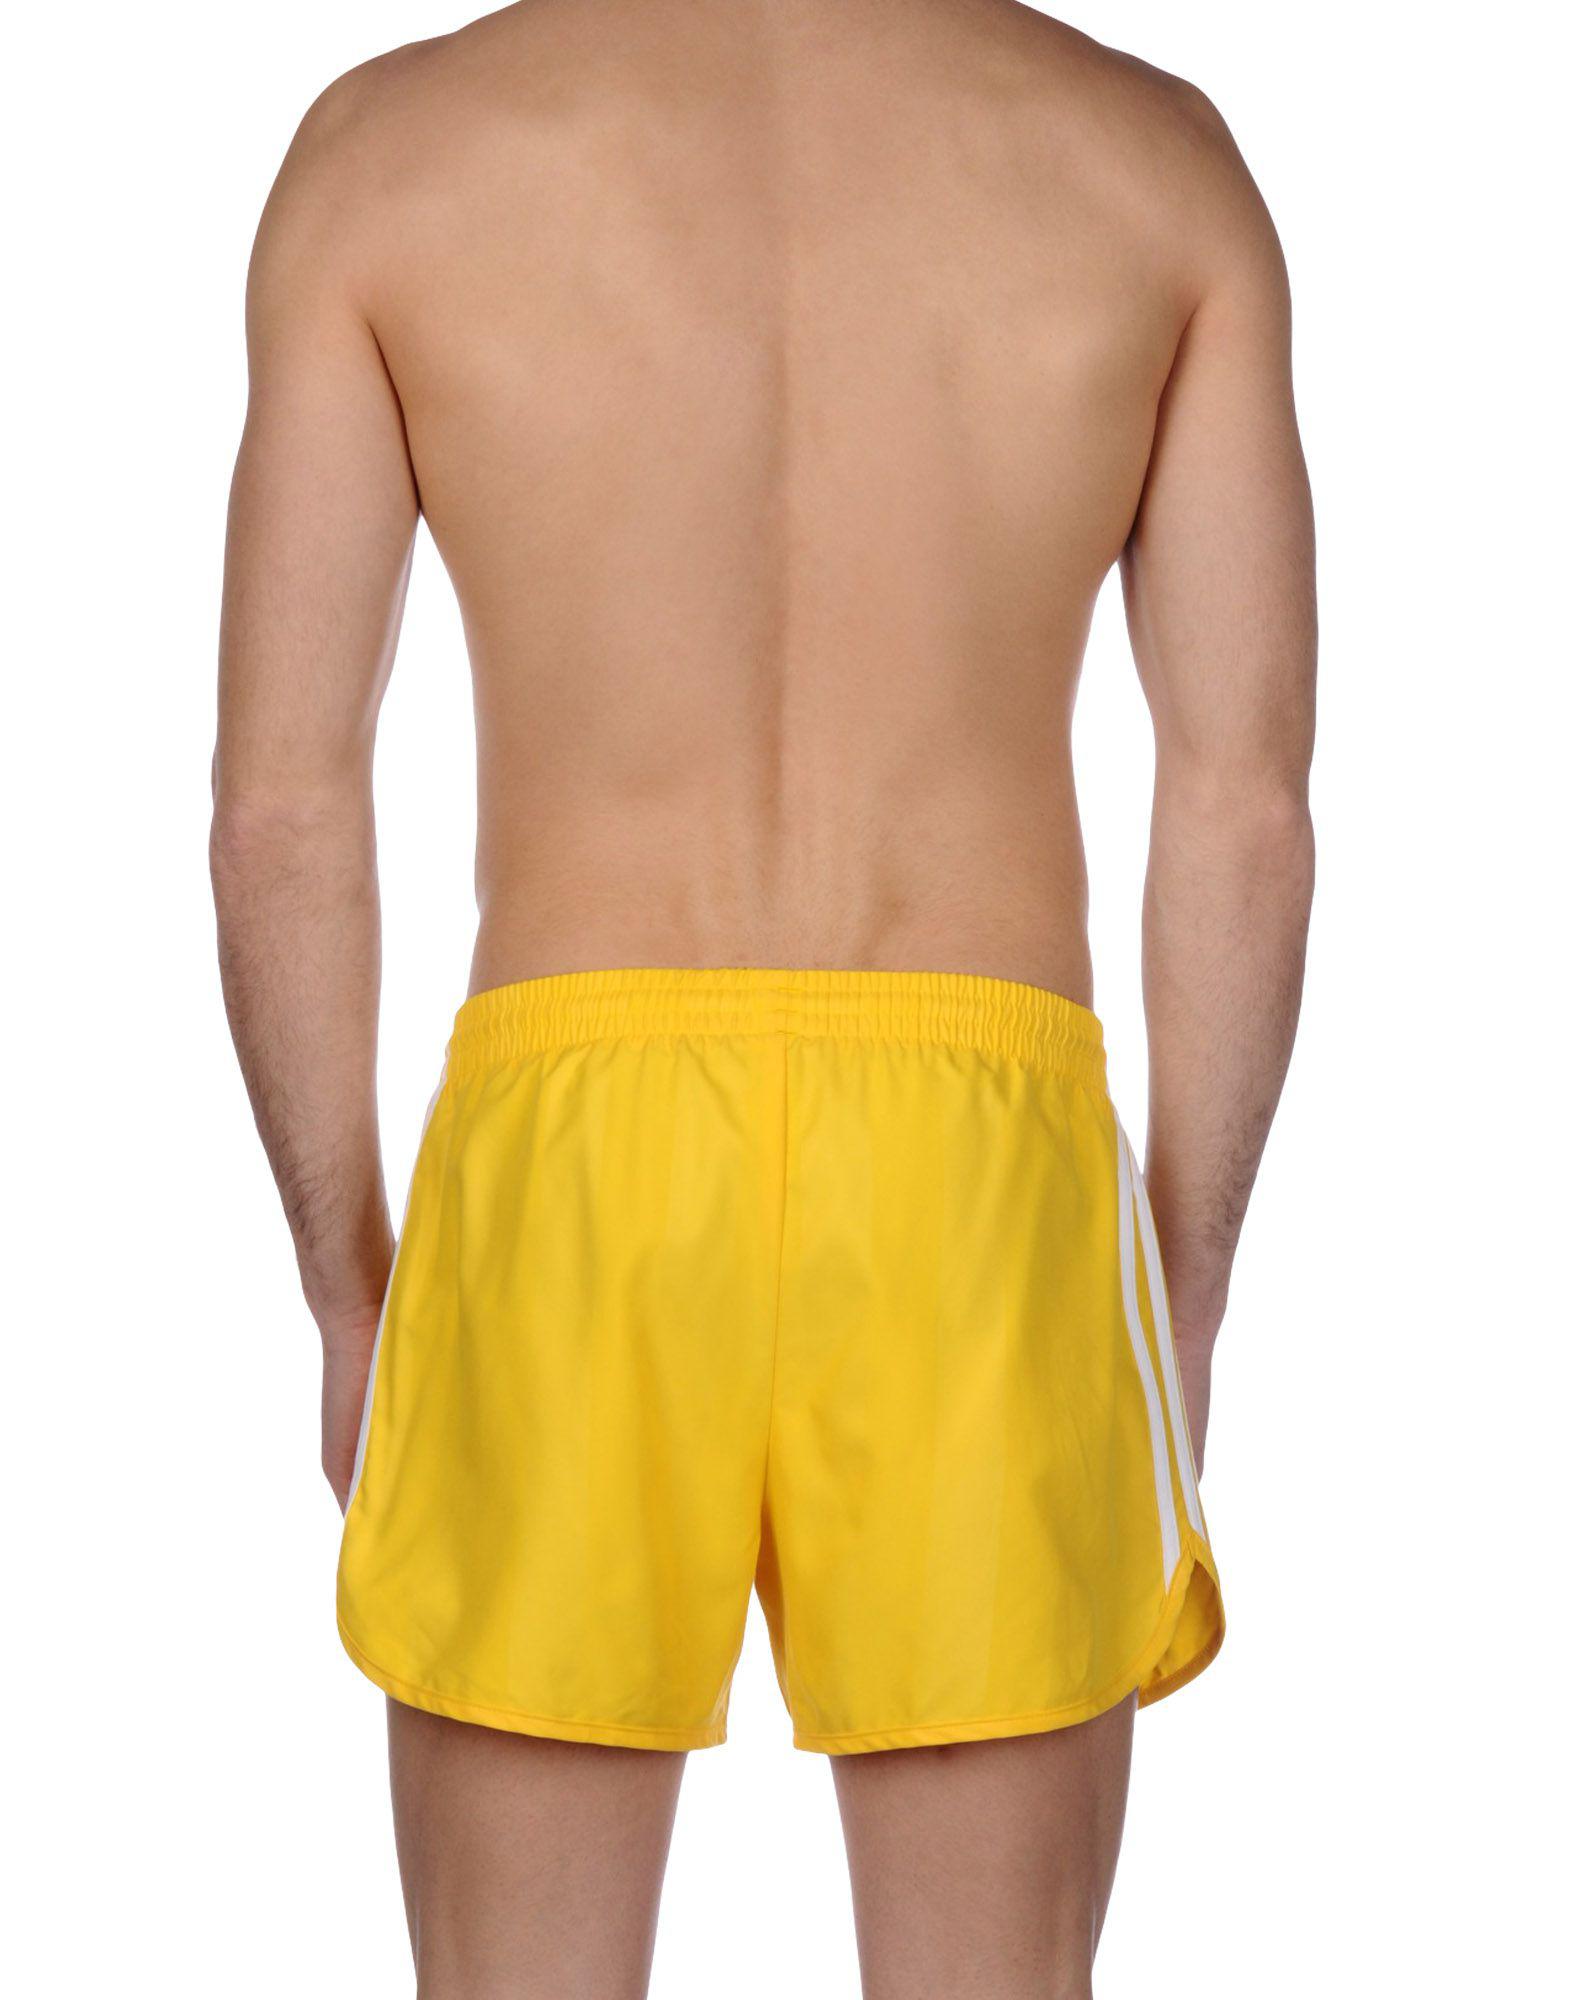 adidas Originals Swimming Trunks in Yellow for Men - Lyst